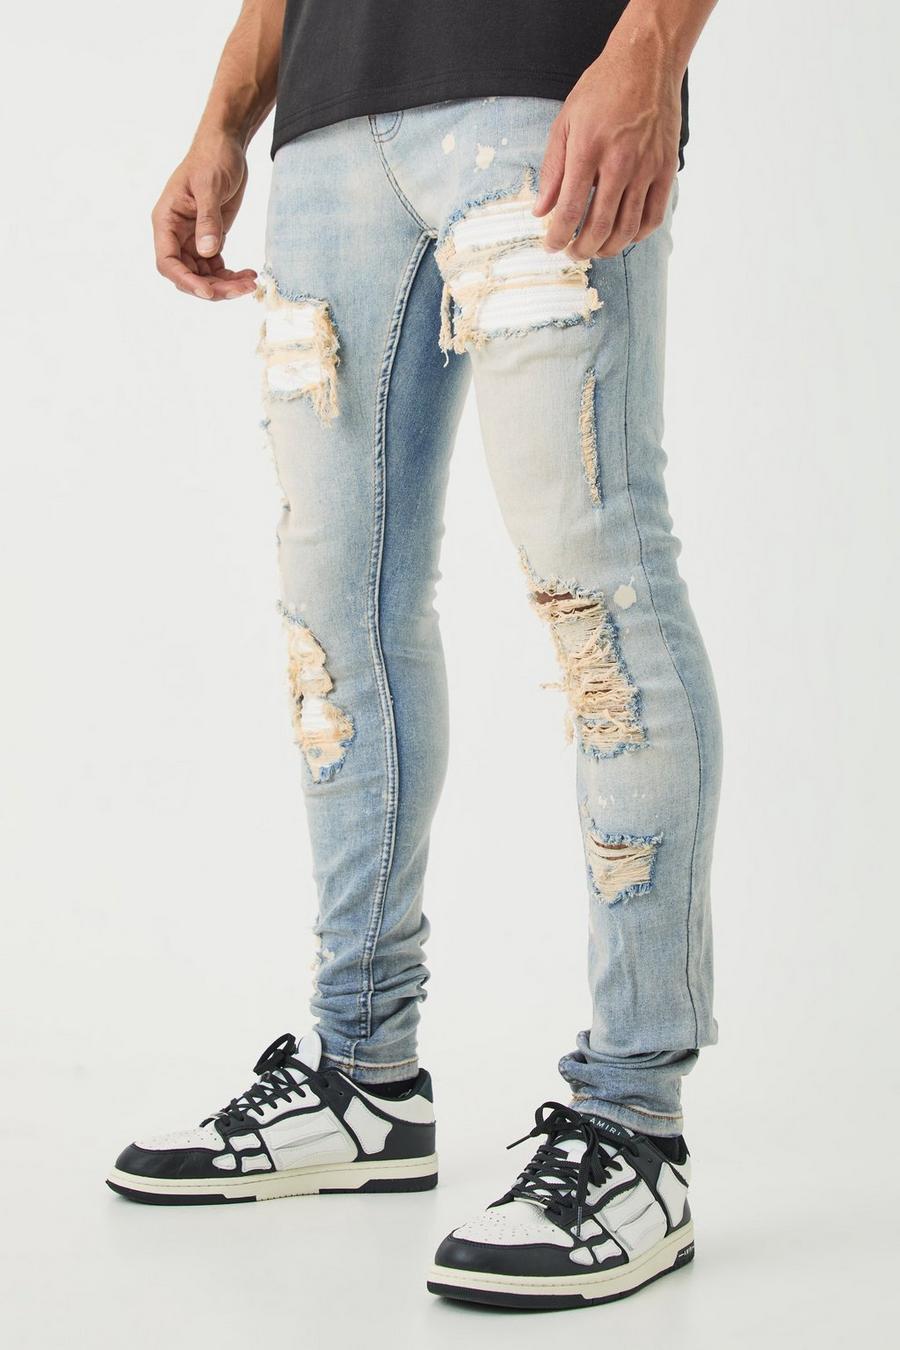 Men's Ripped Jeans, Men's Distressed Jeans